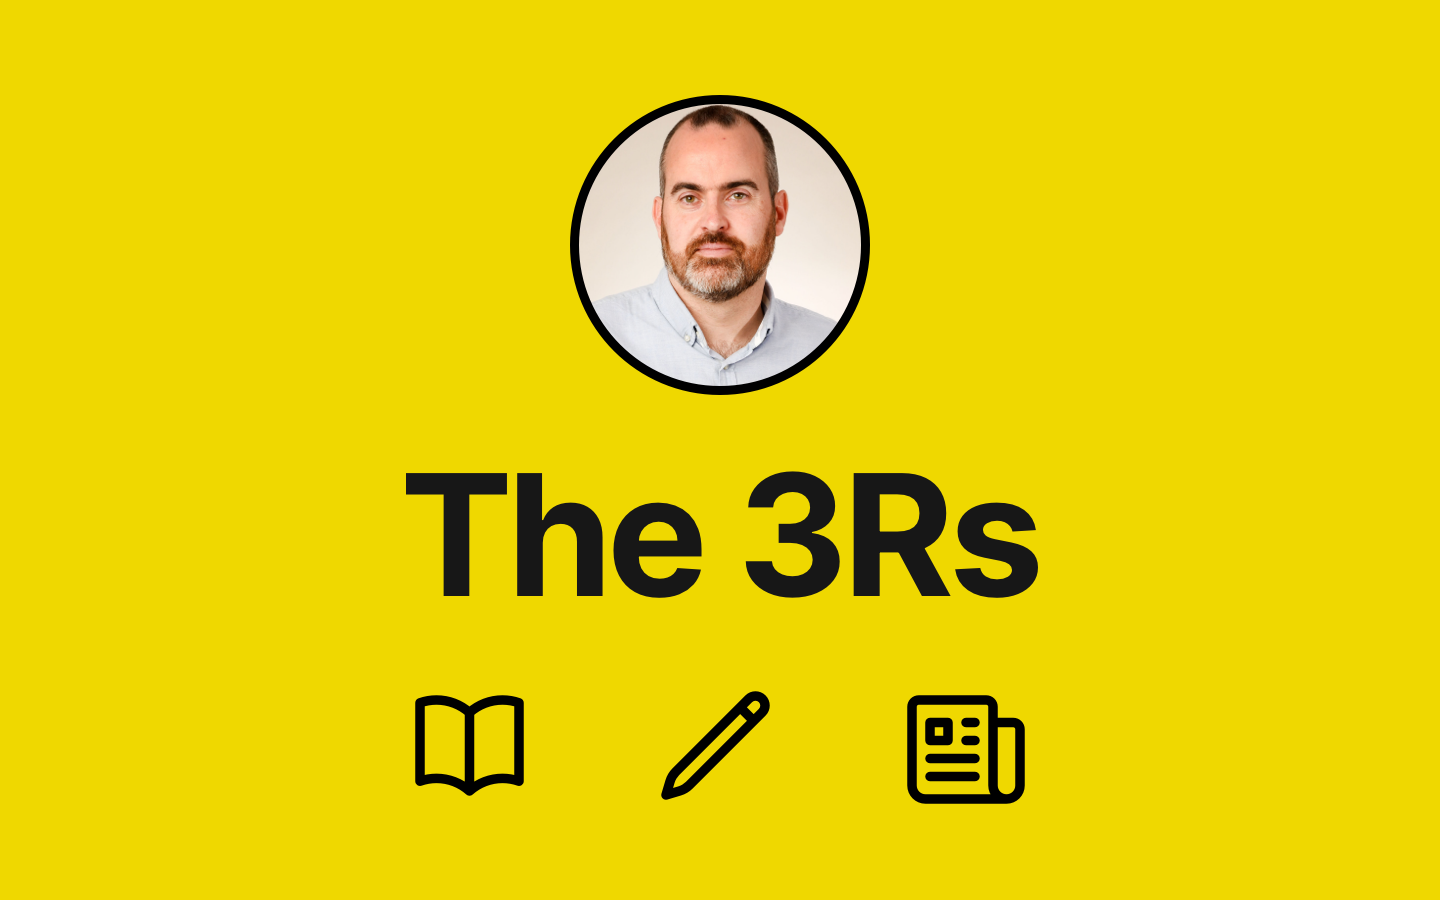 The 3Rs - Reading, writing, and research to be interested in #43 Post feature image